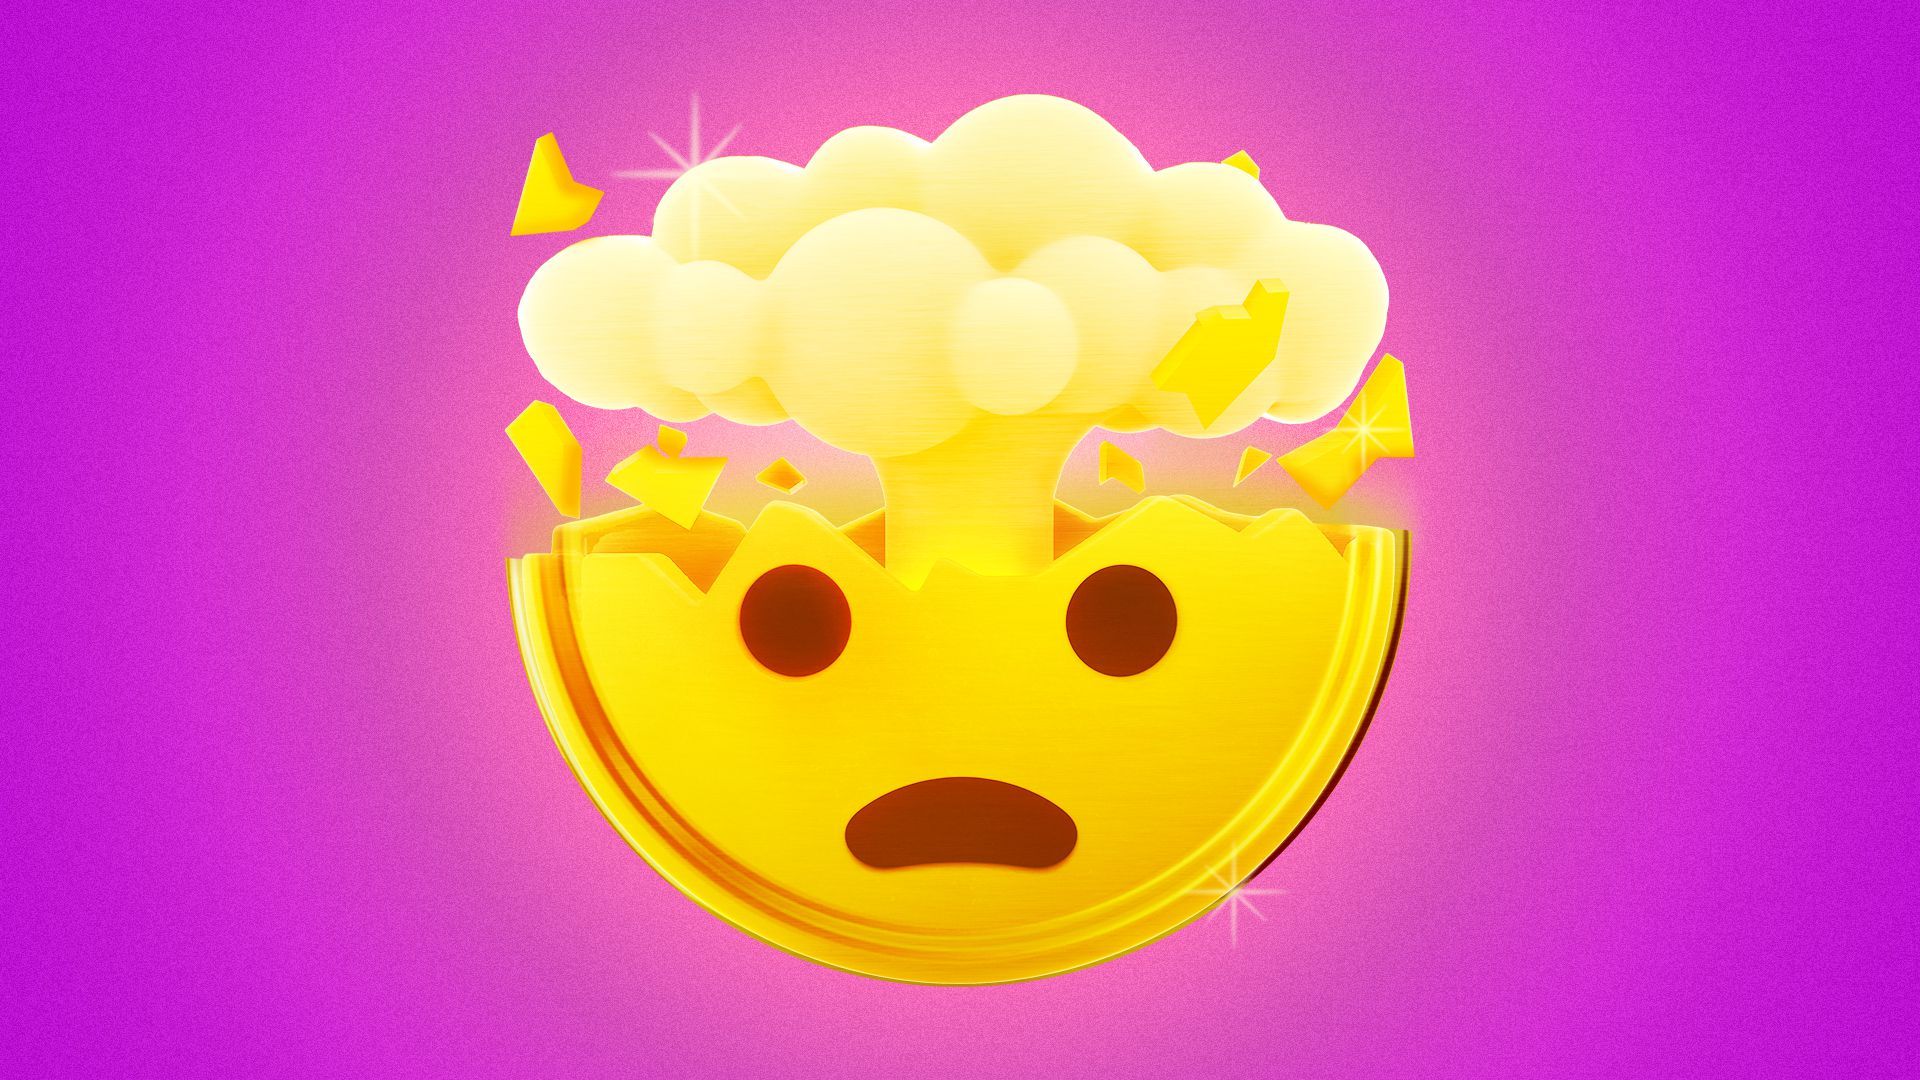 Illustration of the "mind blown" emoji as an exploding coin.